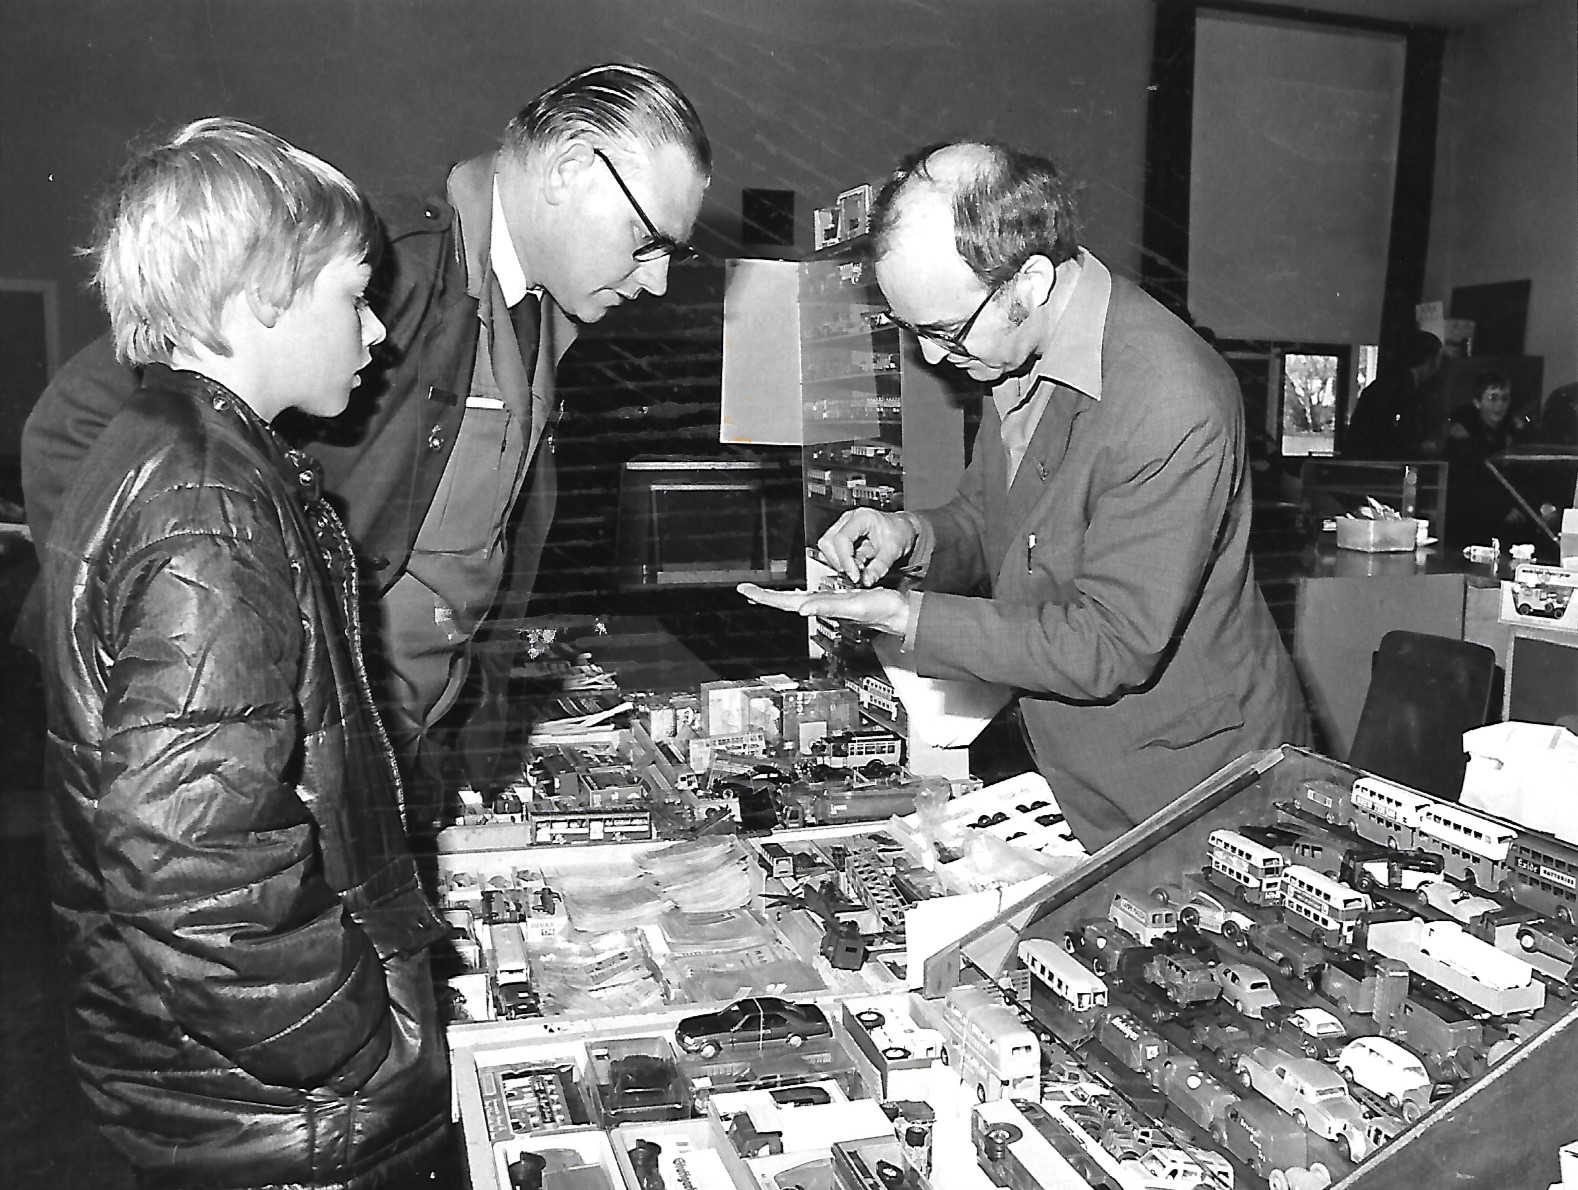 There were lots of impressive looking toy cars, trains and buses on display when the St Johns CE Church Train and Toy Sale took place in May 1982